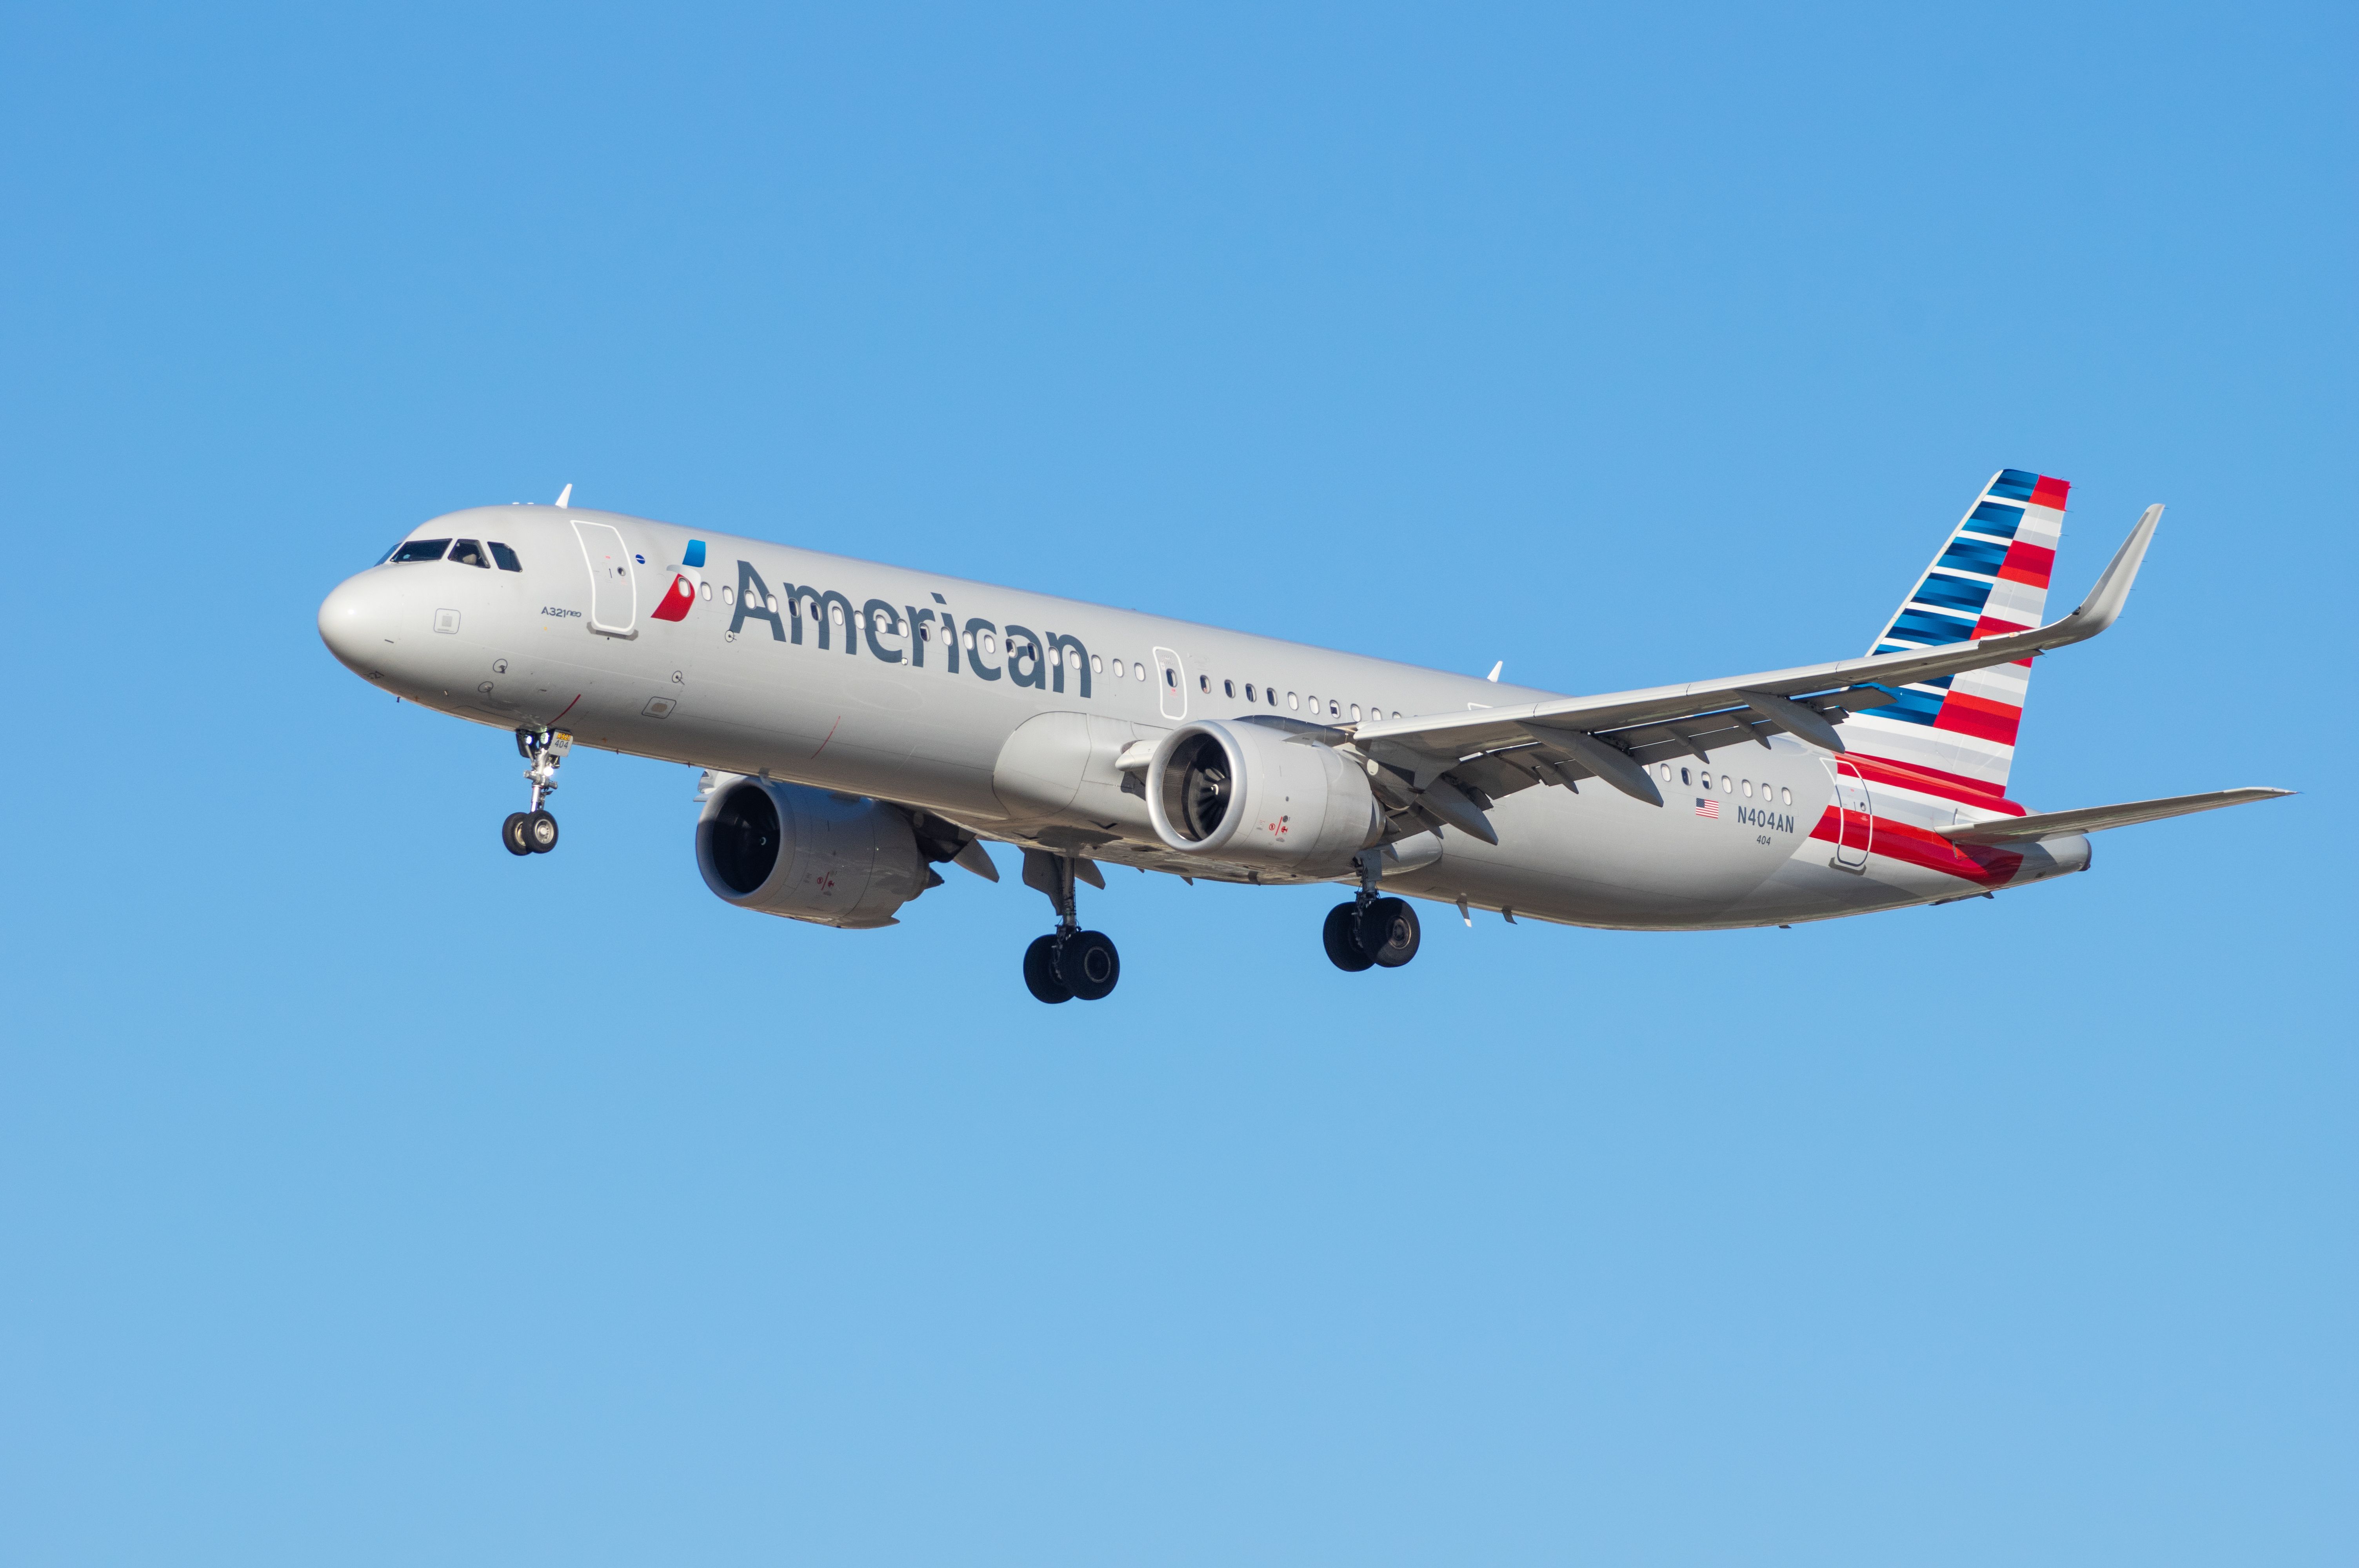 American Airlines A321NEO on approach.